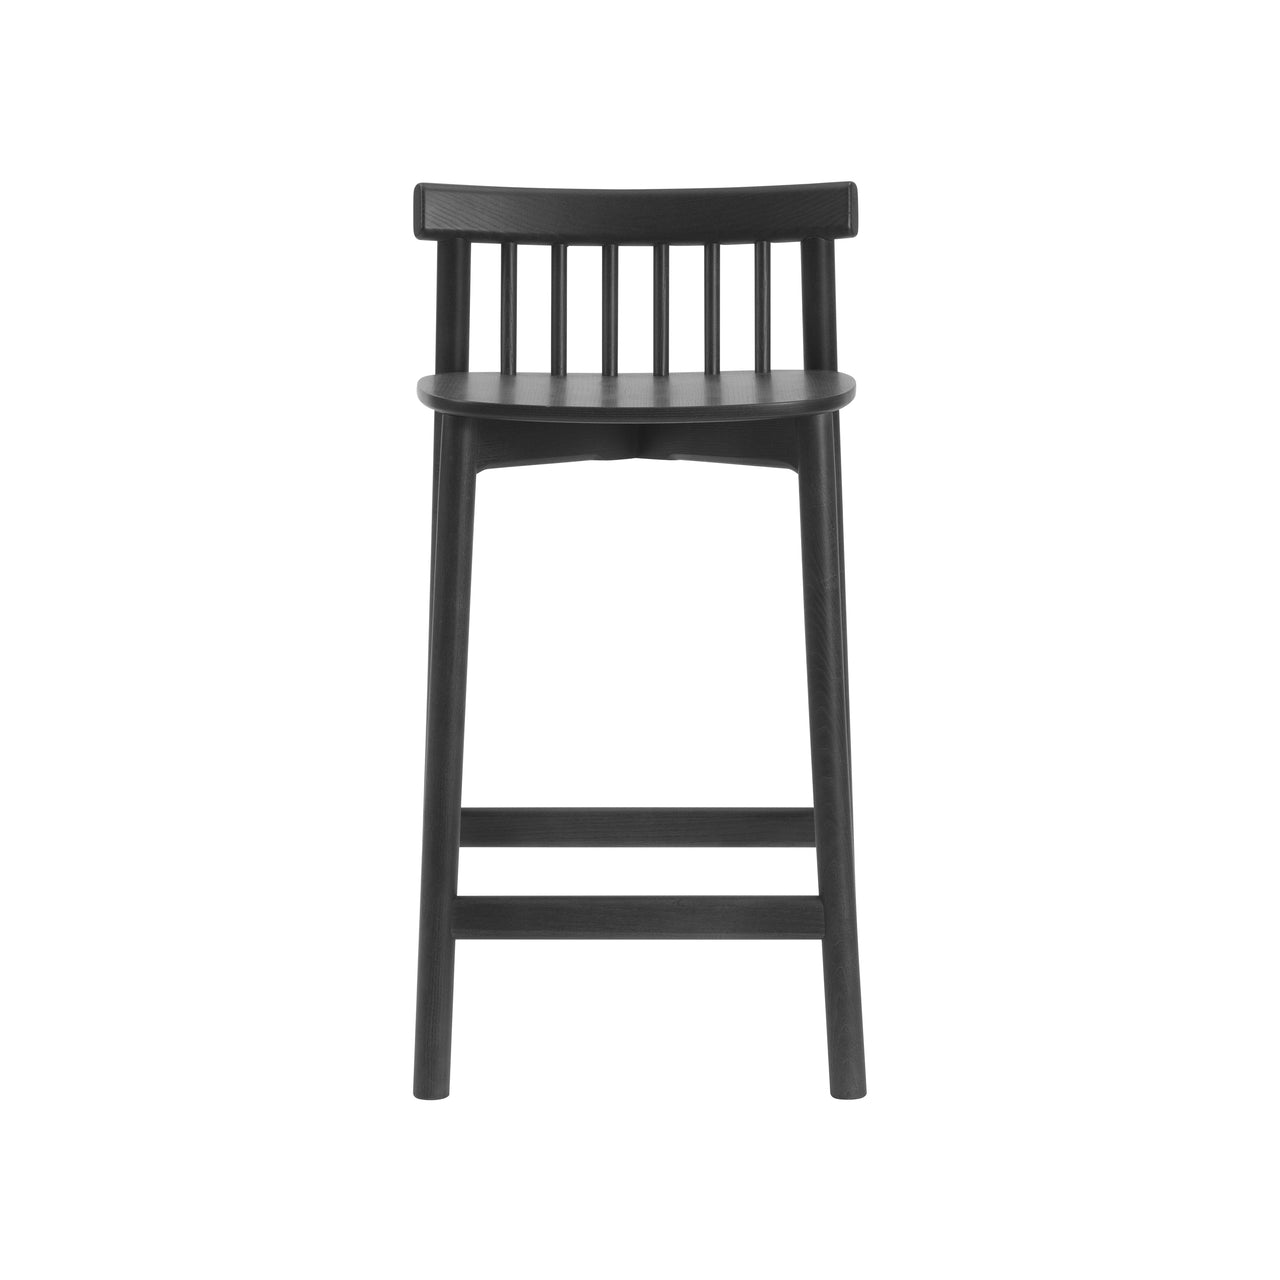 Pind Bar + Counter Stool: Counter + Black Stained Ash